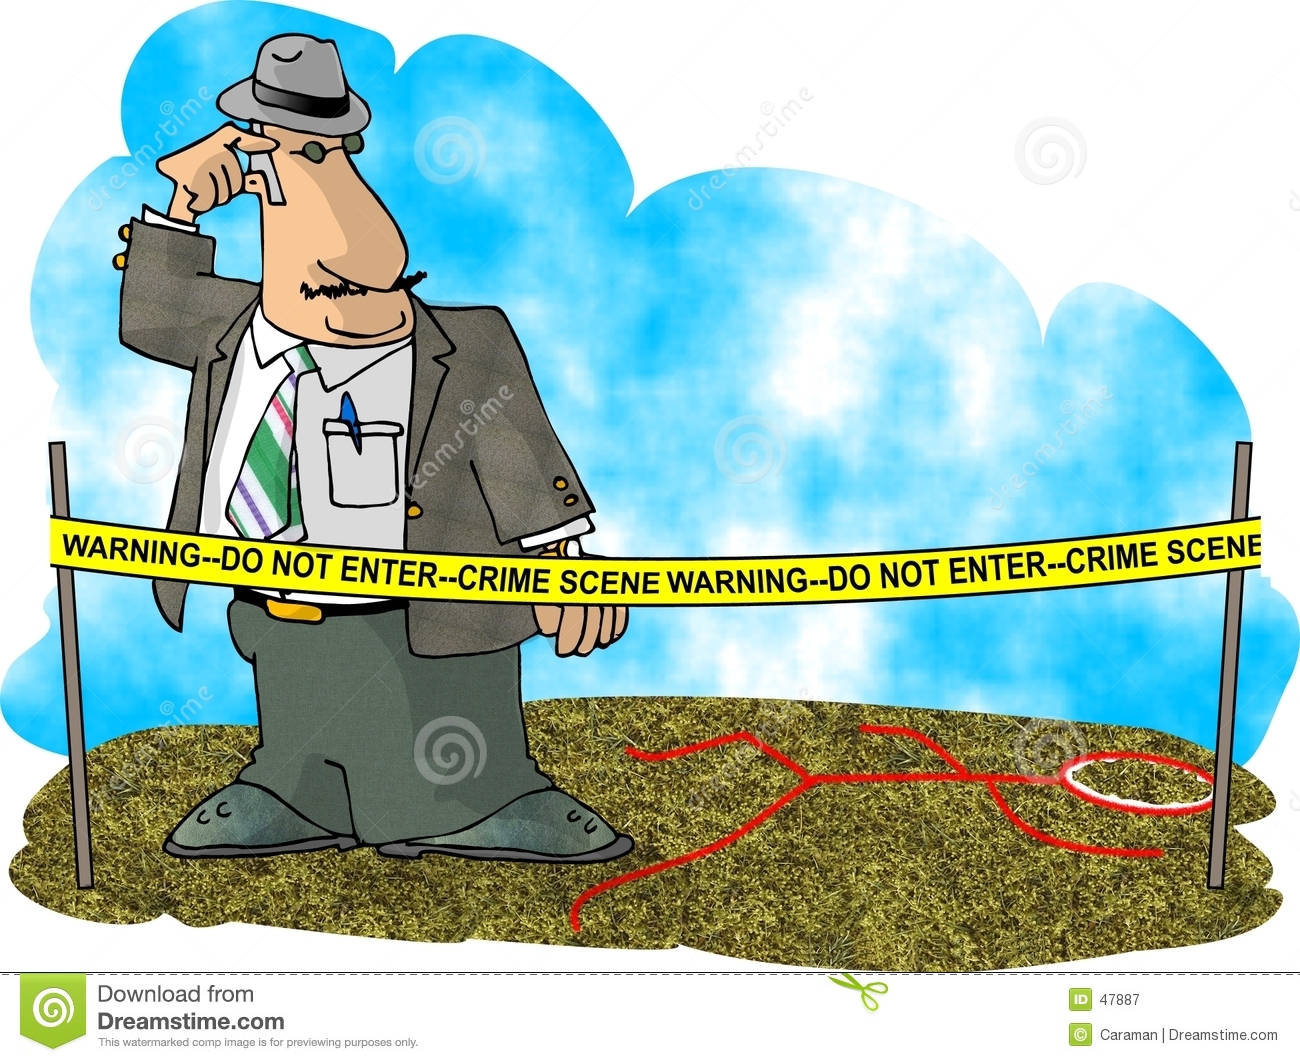 This Illustration That I Created Depicts A Crime Scene Investigator